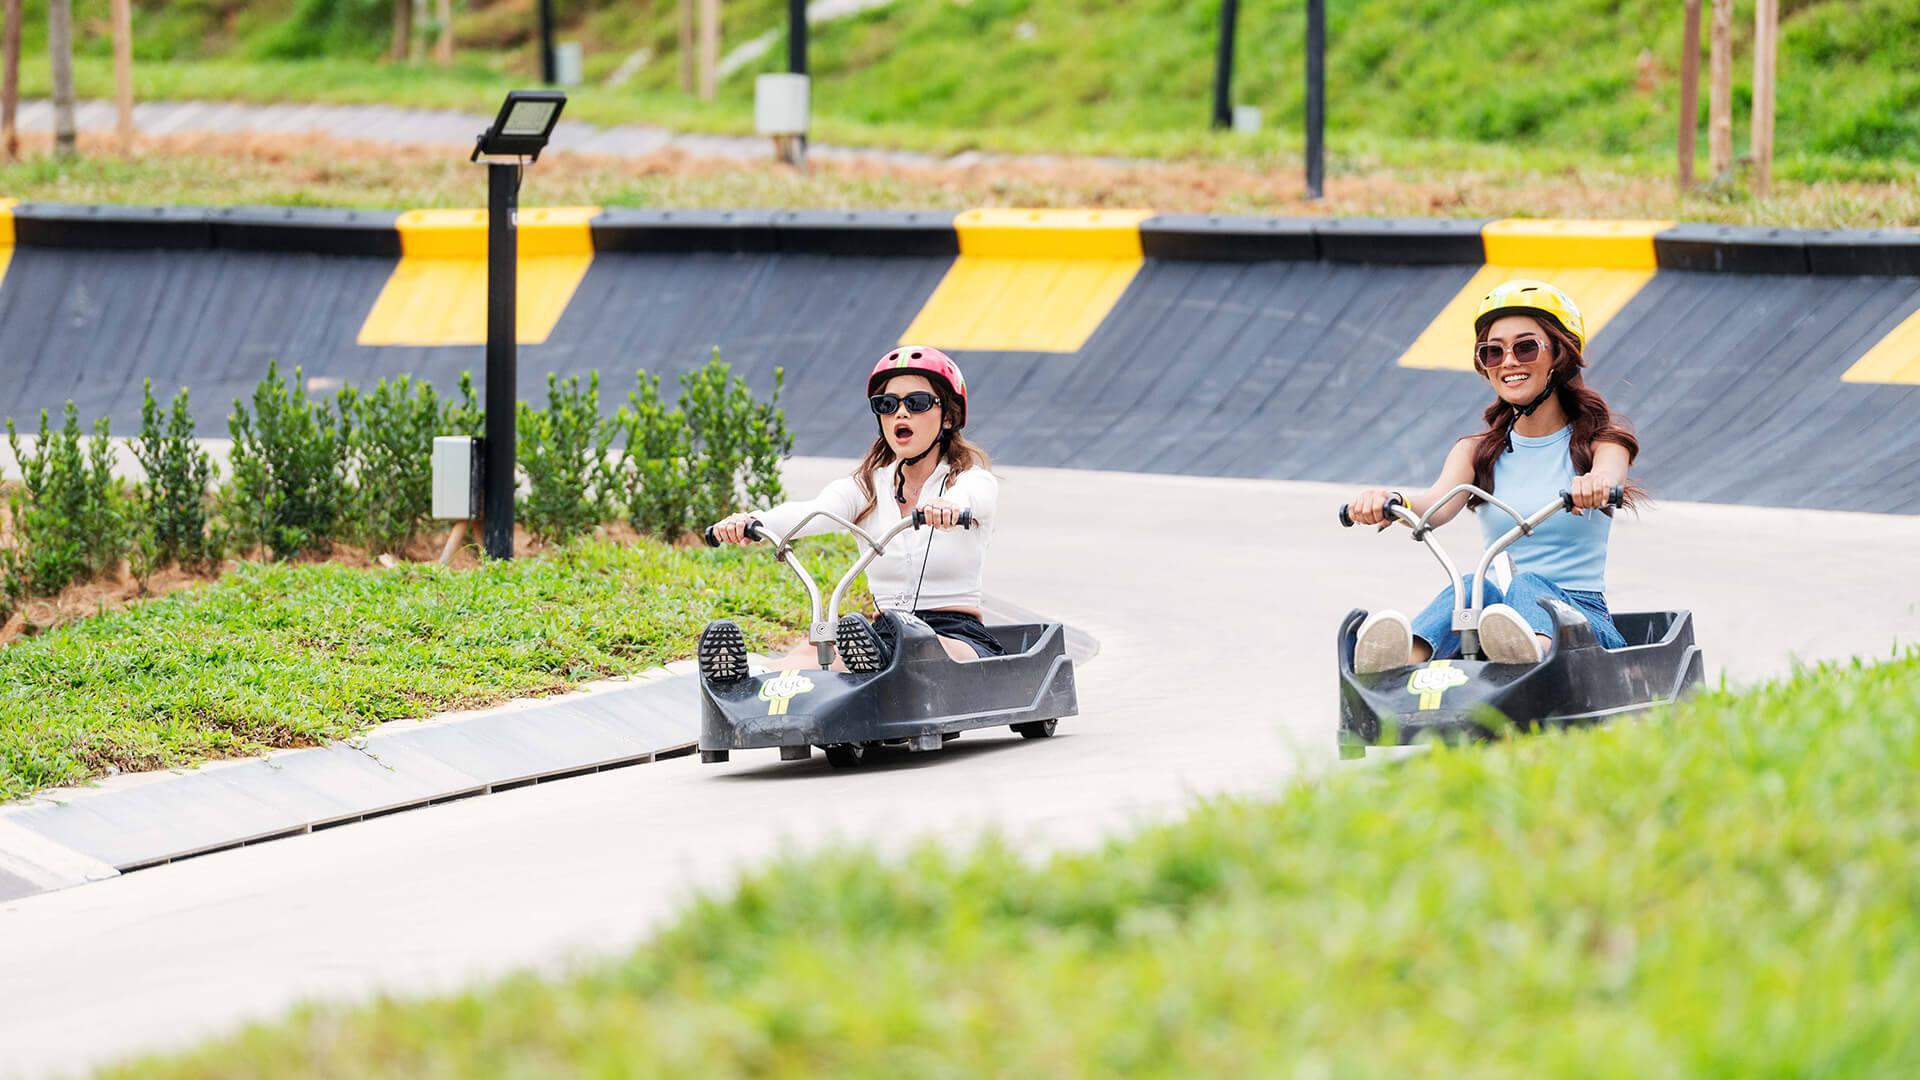 Two girls scream and smile as they descend the tracks at Skyline Luge Kuala Lumpur.